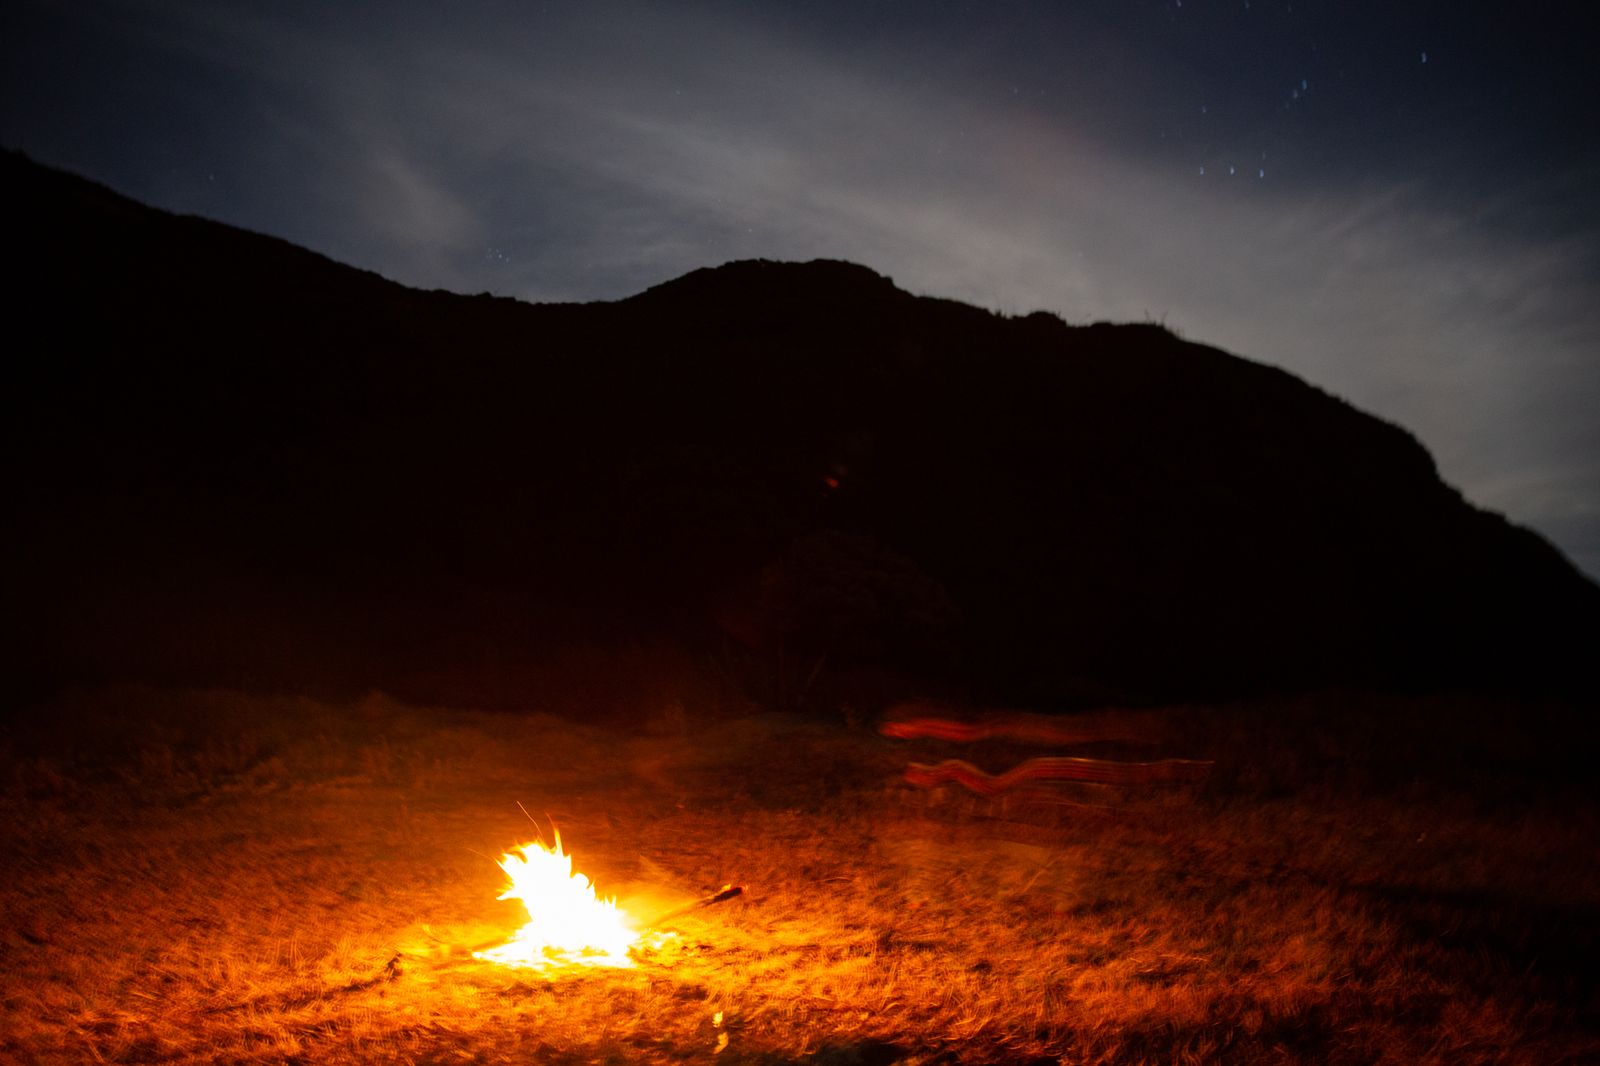 © Sofia Aldinio - Night fire, while camping out in New Zealand.